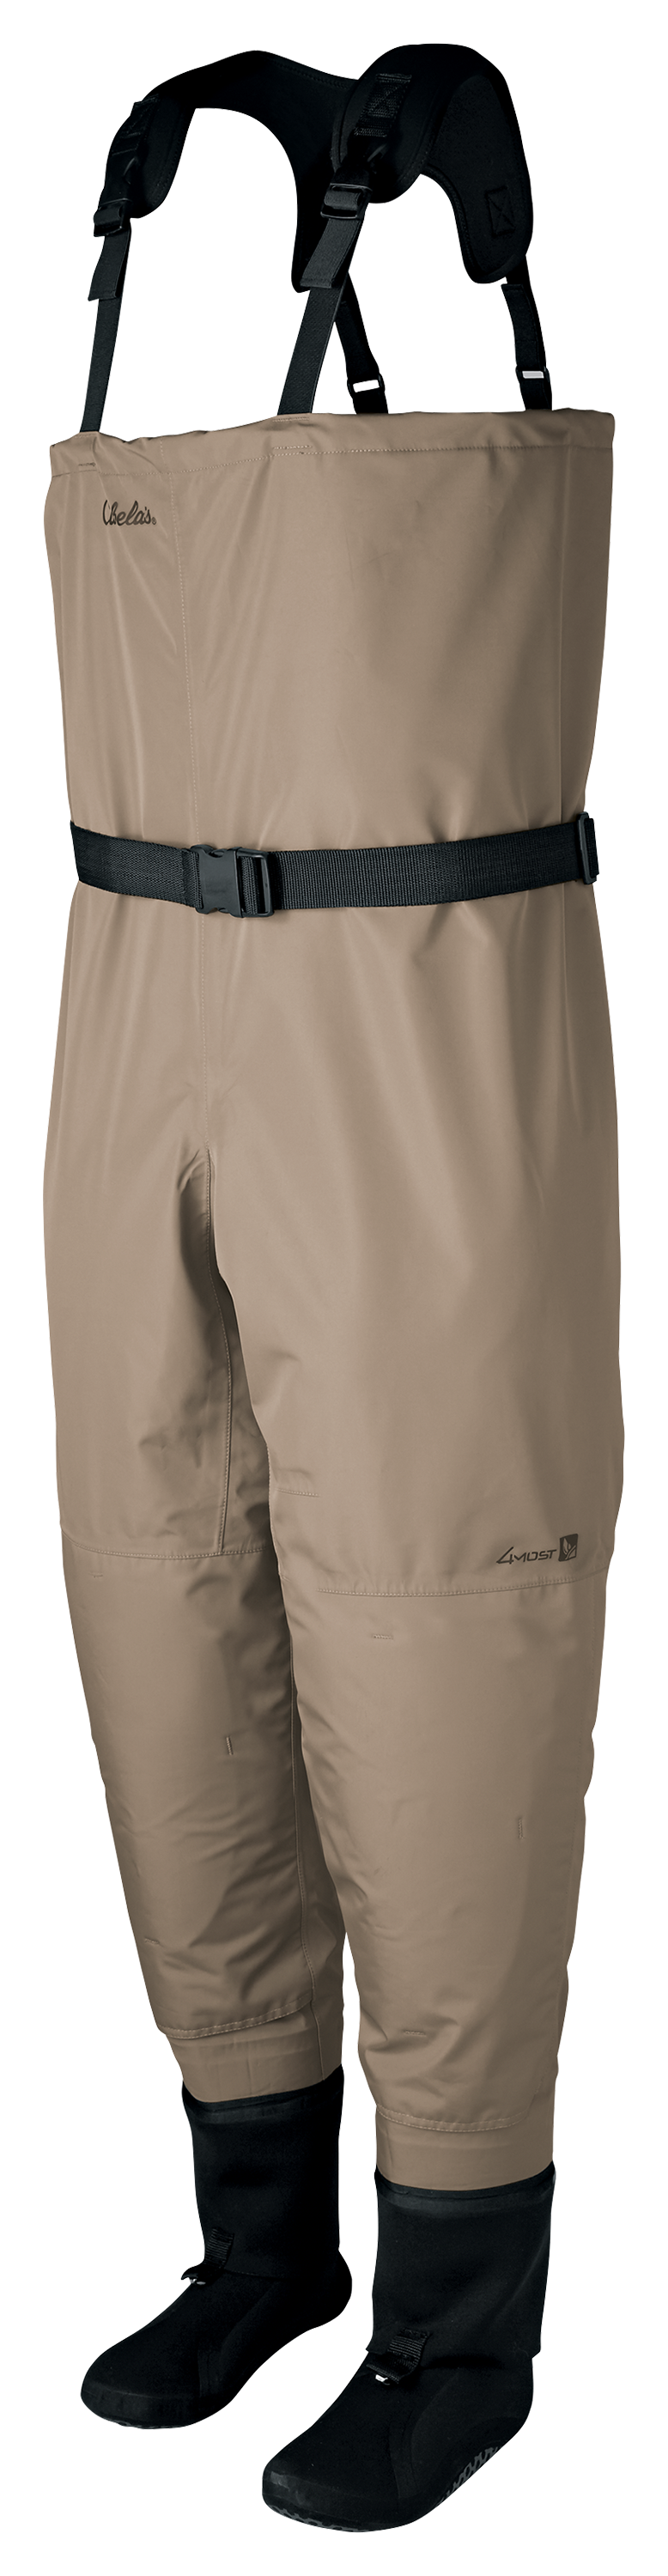 Cabela's Premium Breathable Stocking-Foot Fishing Waders for Men - Tan - Large